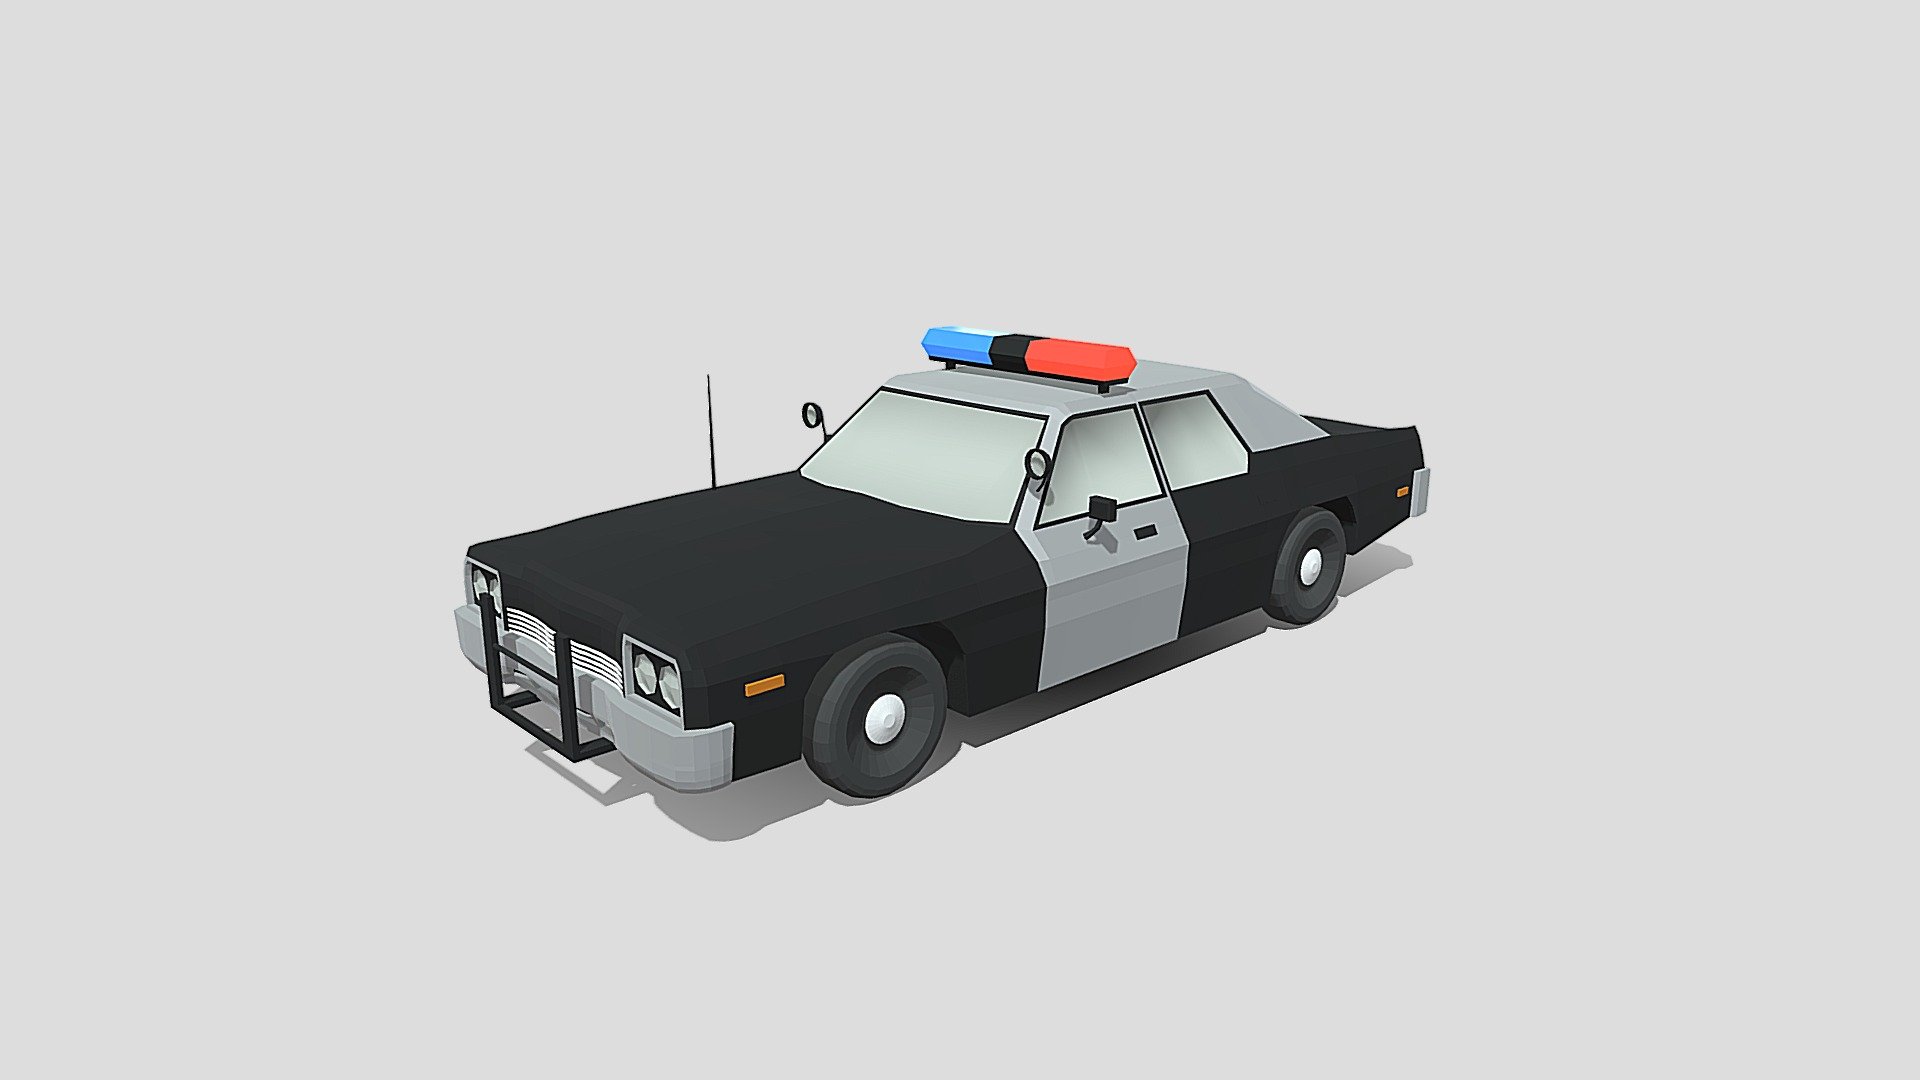 This is a low poly 3d model of a Dodge Monaco police car. The low poly car was modelled and prepared for low-poly style renderings, background, general CG visualization presented as a mesh with quads only.

Verts : 5.510 Faces: 5.413

The model have simple materials with diffuse colors.

No ring, maps and no UVW mapping is available.

The original file was created in blender. You will receive a 3DS, OBJ, FBX, blend, DAE, Stl.

All preview images were rendered with Blender Cycles. Product is ready to render out-of-the-box. Please note that the lights, cameras, and background is only included in the .blend file. The model is clean and alone in the other provided files, centred at origin and has real-world scale 3d model